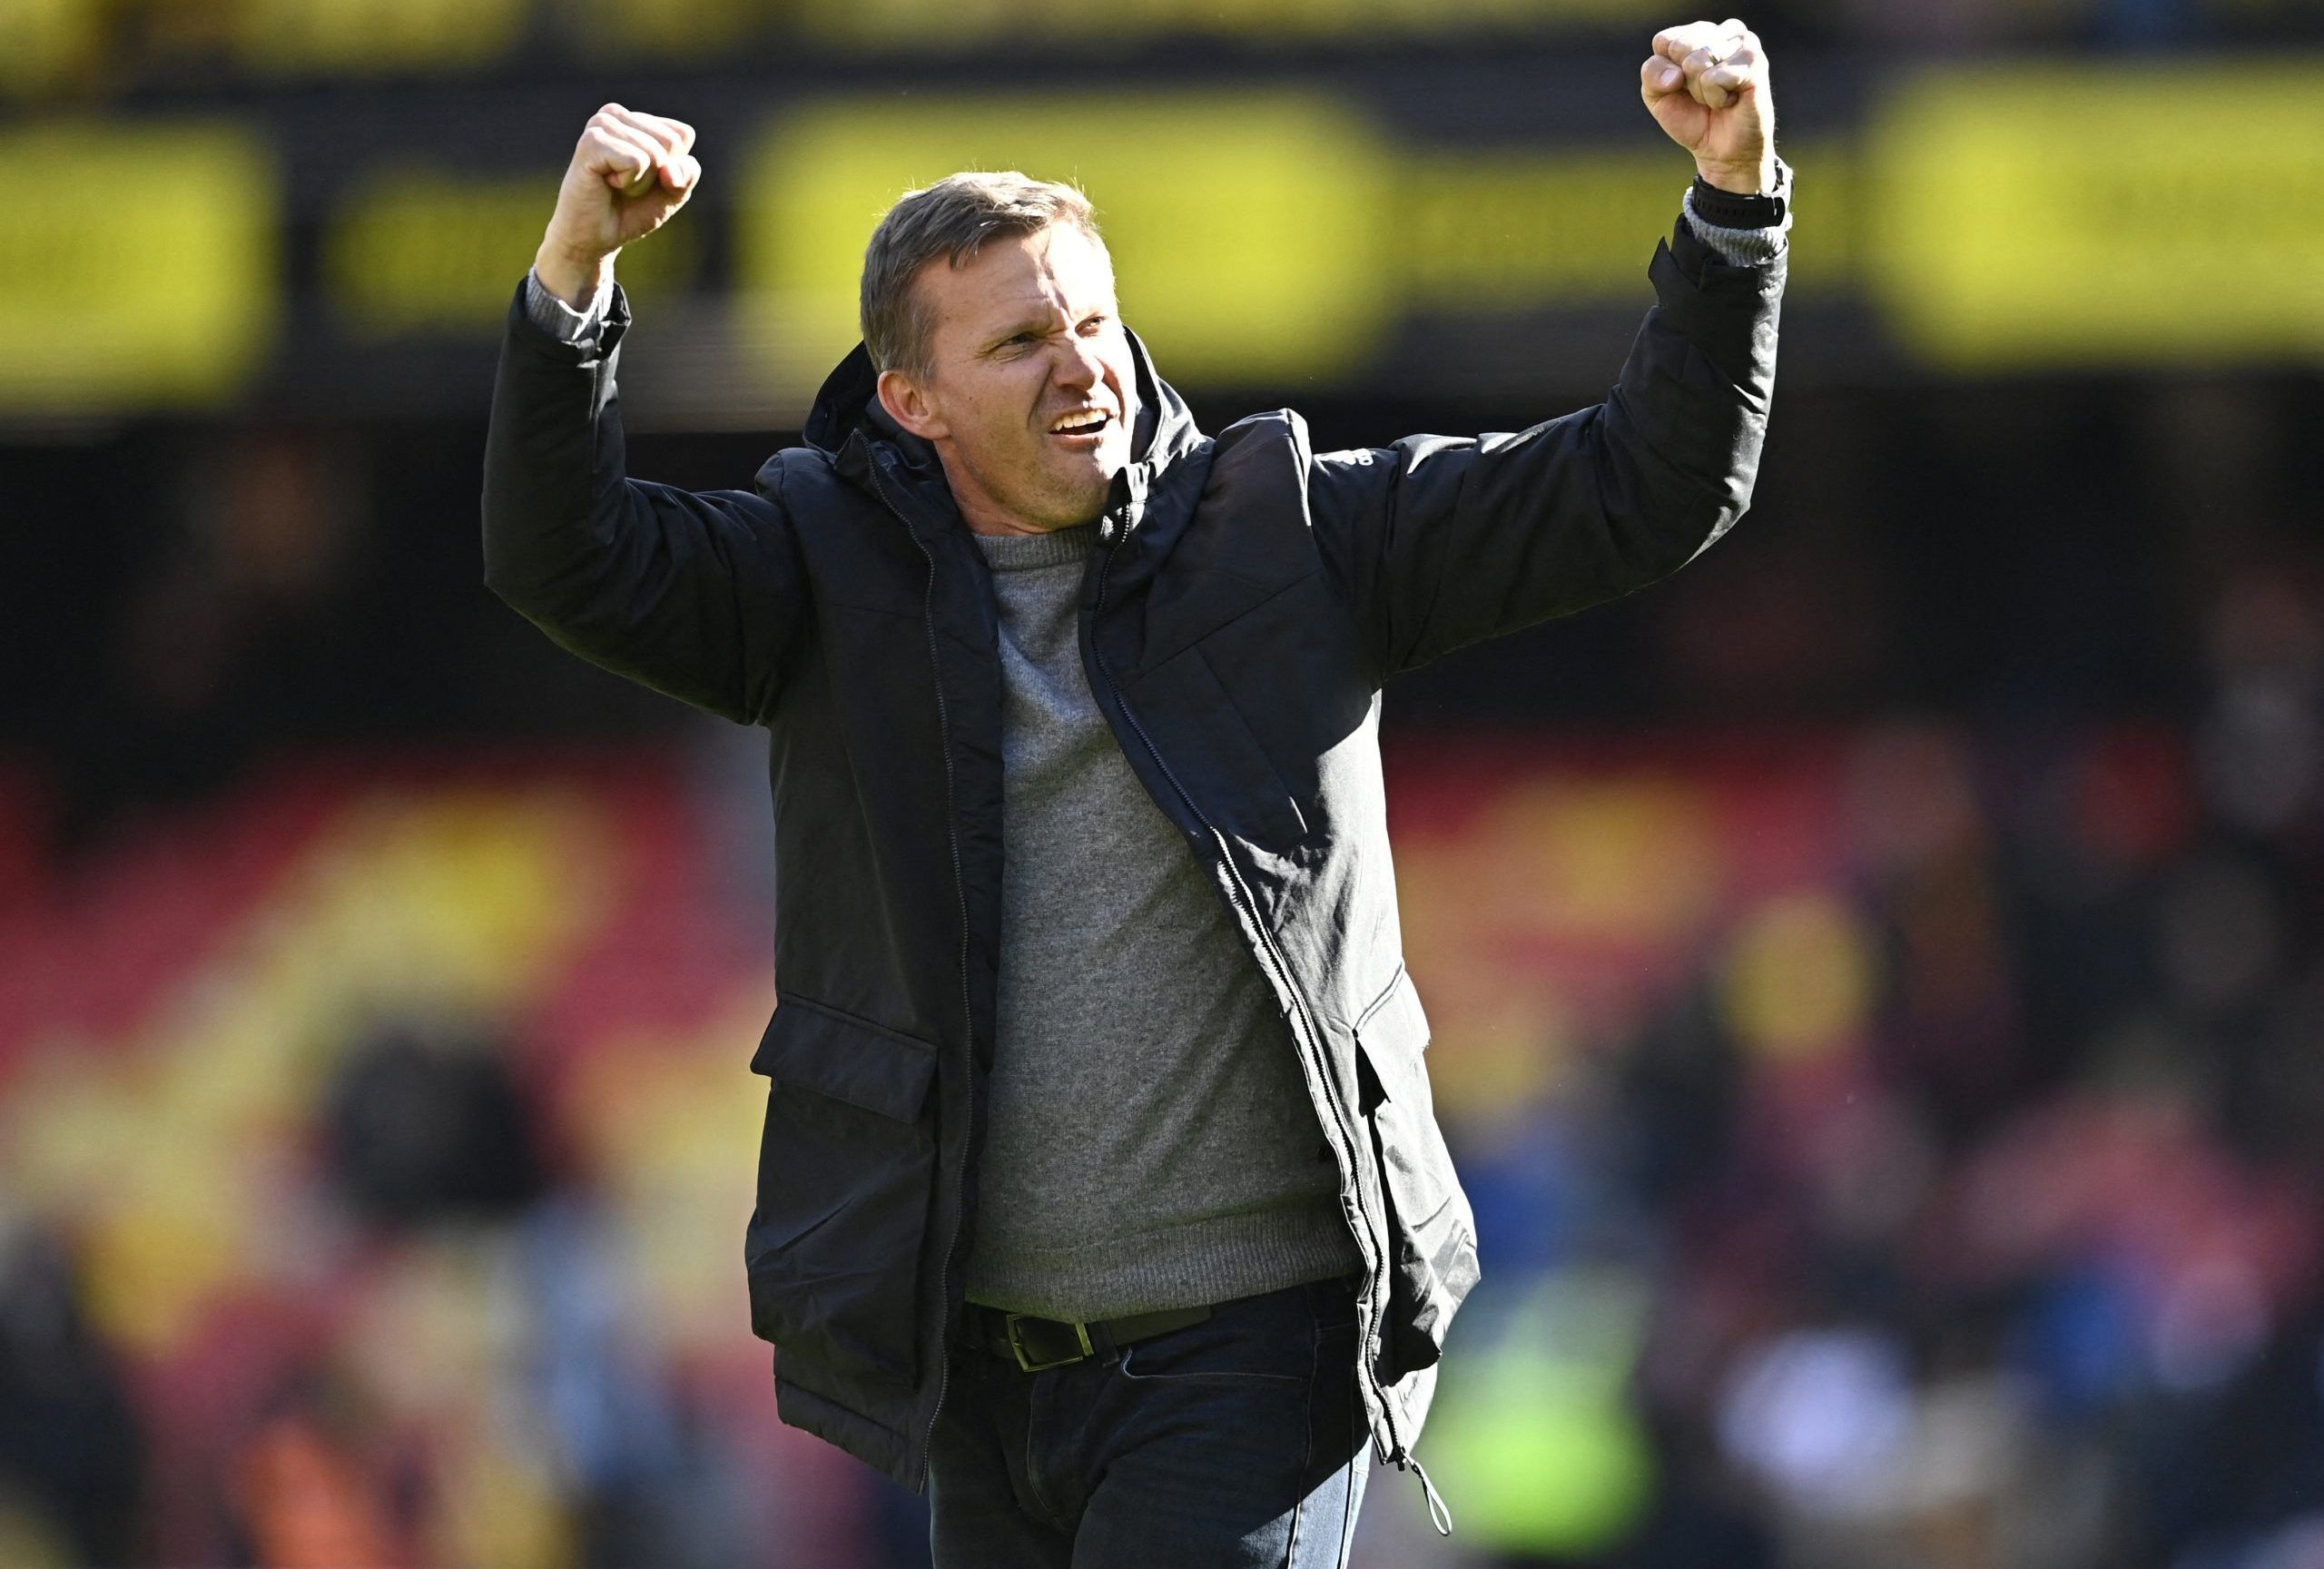 Soccer Football - Premier League - Watford v Leeds United - Vicarage Road, Watford, Britain - April 9, 2022 Leeds United manager Jesse Marsch celebrates after the match REUTERS/Tony Obrien EDITORIAL USE ONLY. No use with unauthorized audio, video, data, fixture lists, club/league logos or 'live' services. Online in-match use limited to 75 images, no video emulation. No use in betting, games or single club /league/player publications.  Please contact your account representative for further detail